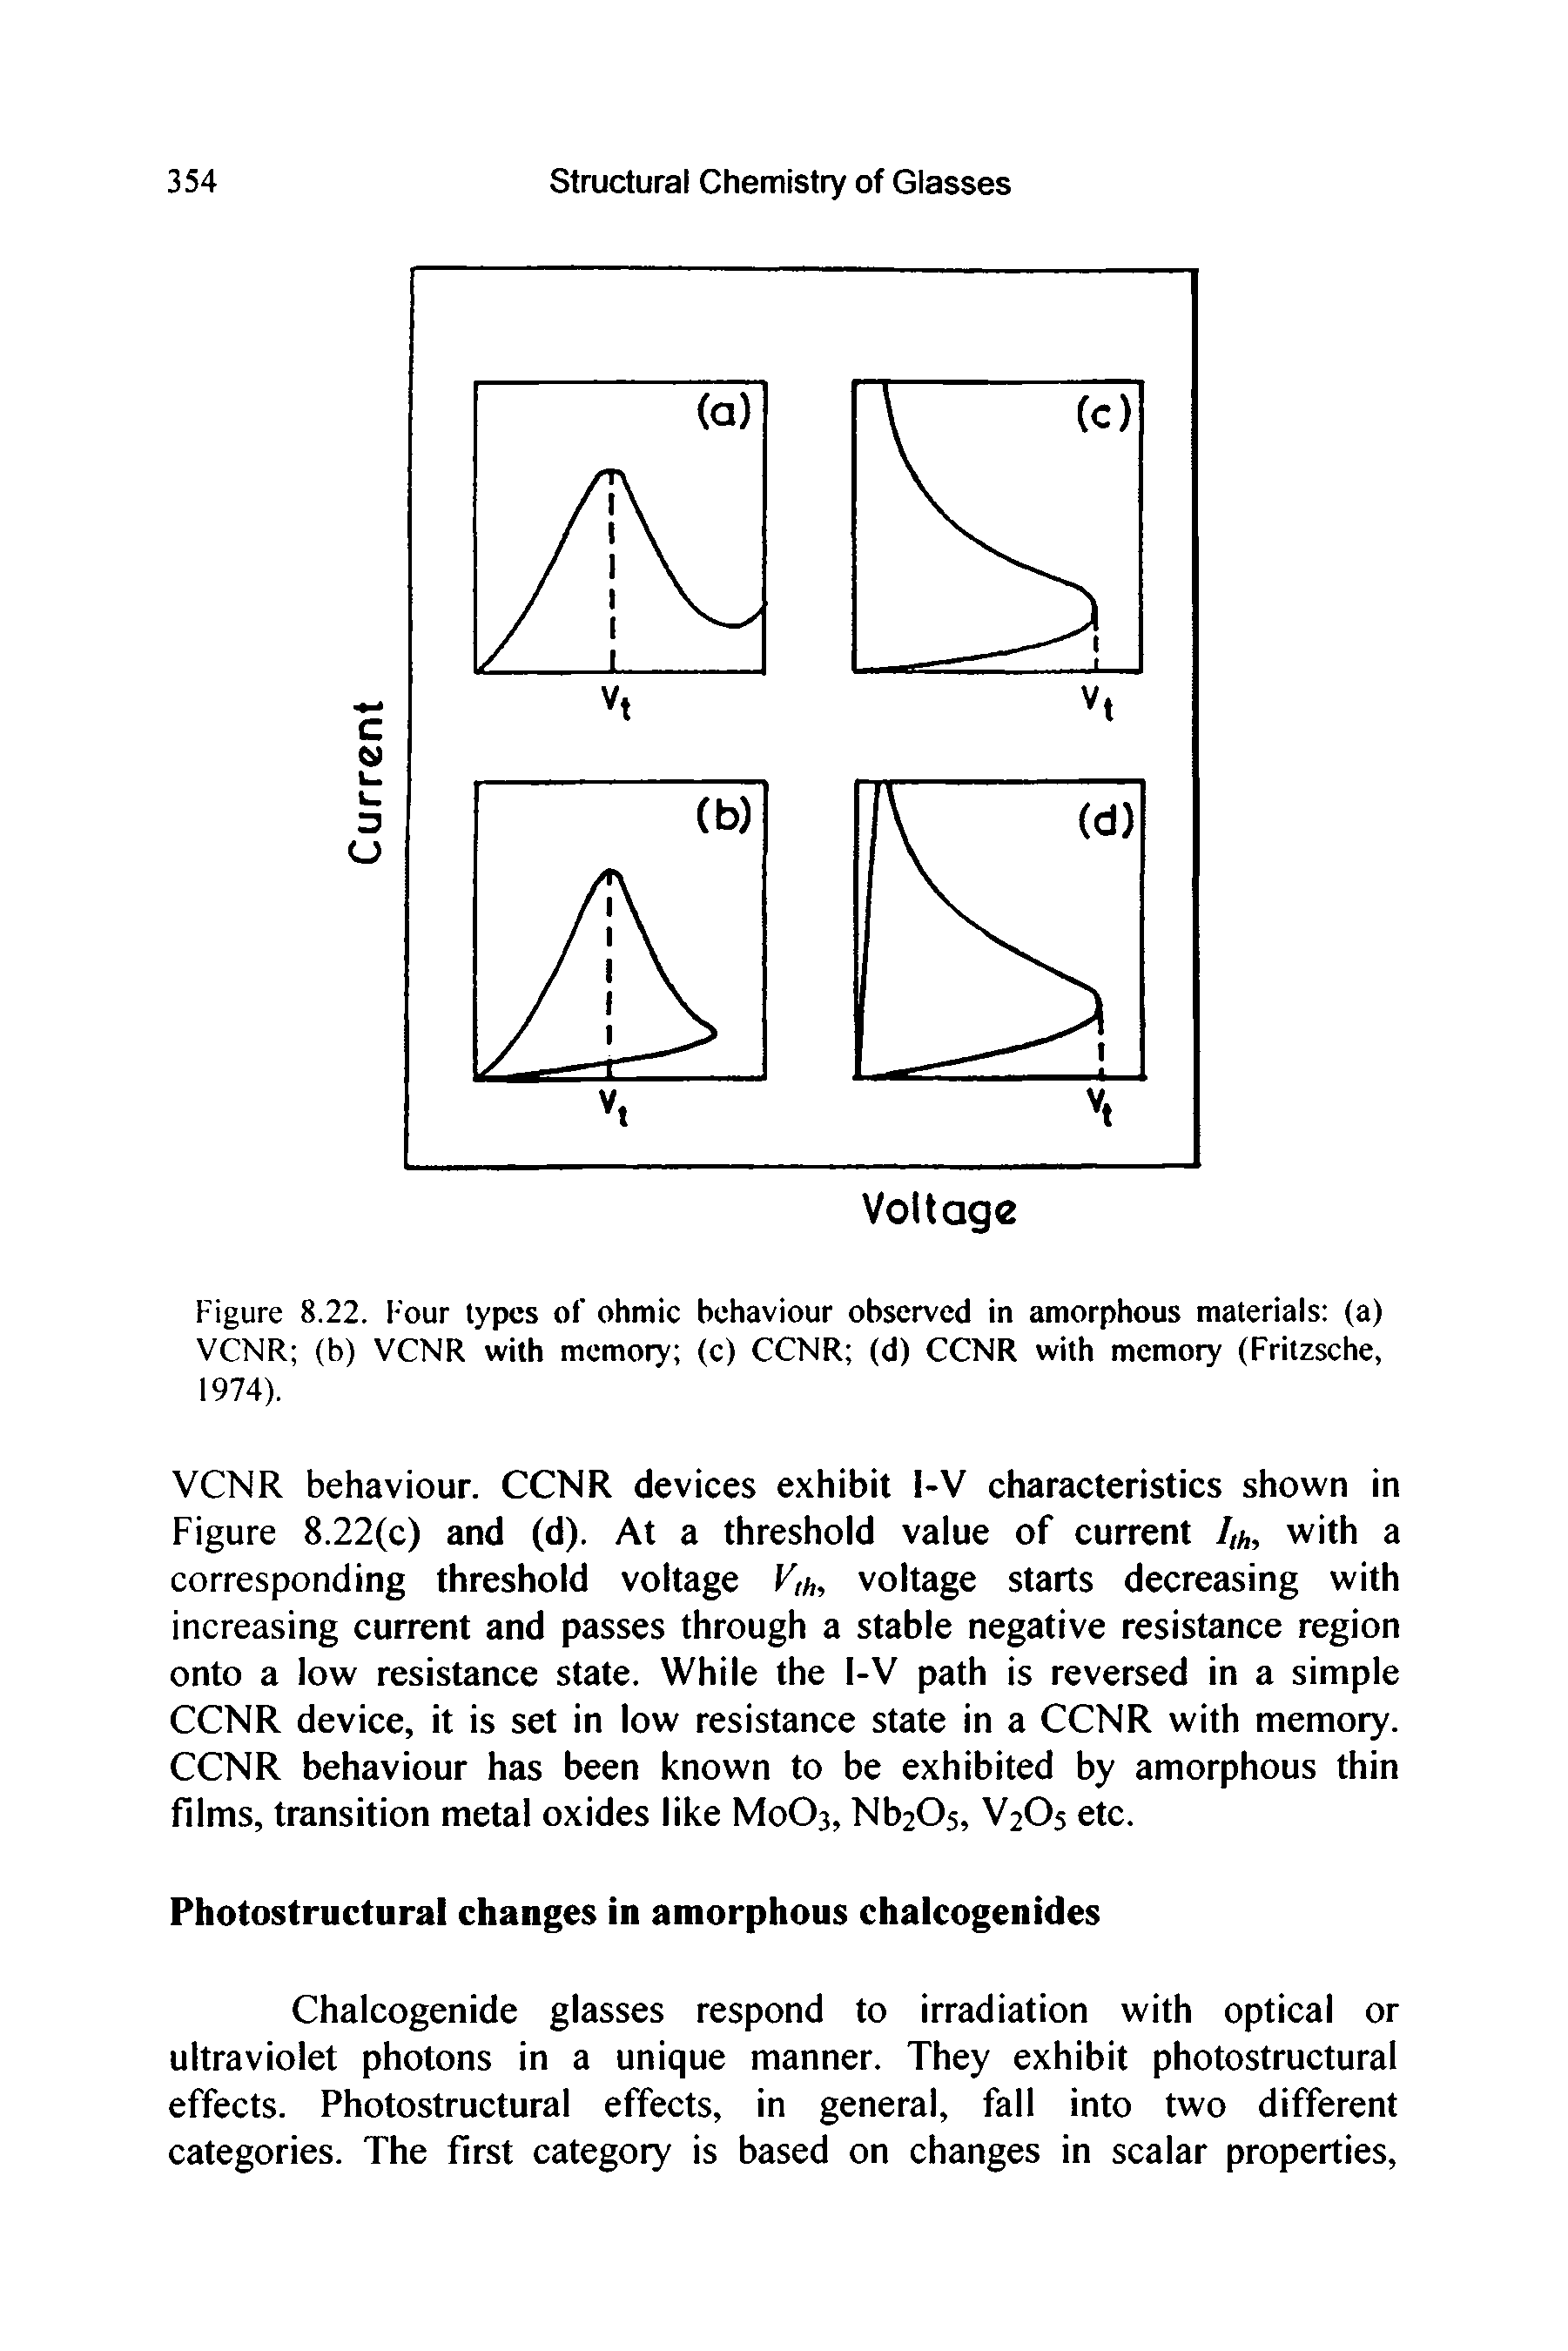 Figure 8.22. Four types of ohmic behaviour observed in amorphous materials (a) VCNR (b) VCNR with memory (c) CCNR (d) CCNR with memory (Fritzsche, 1974).